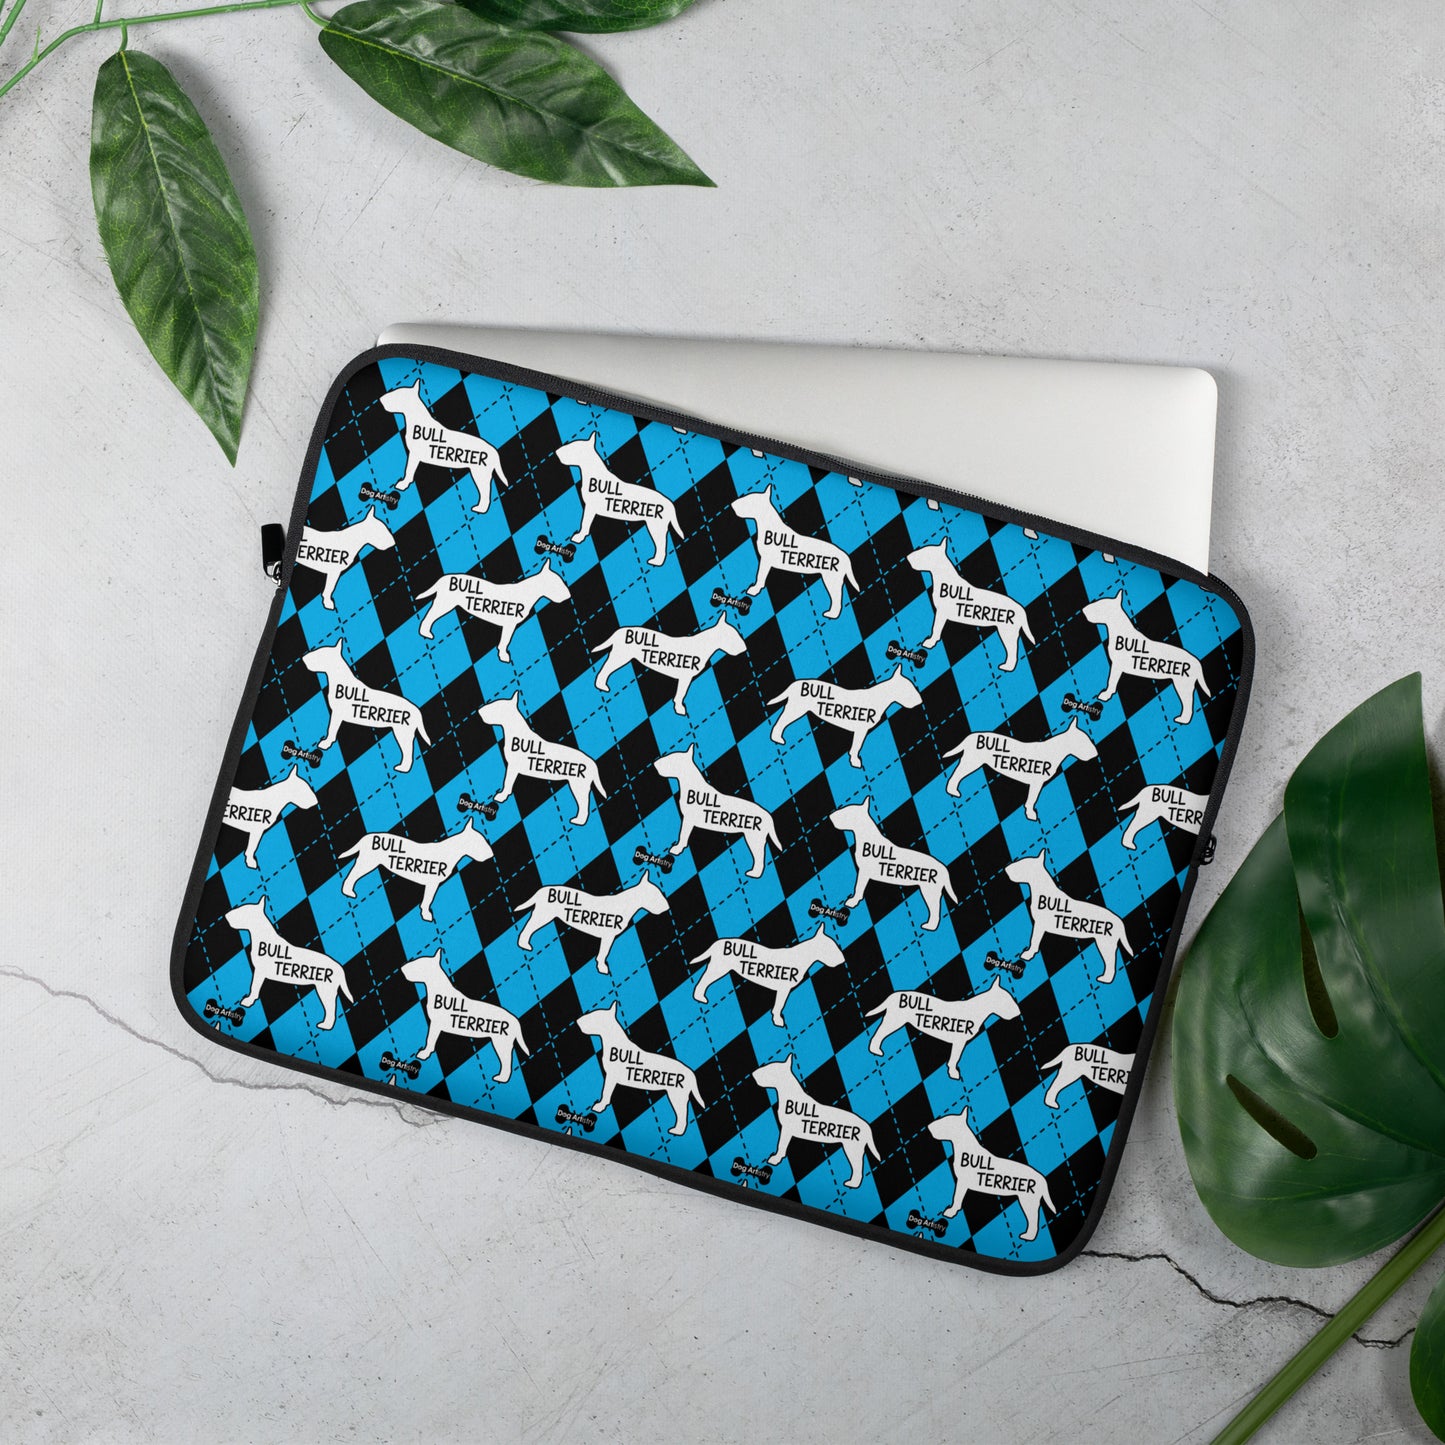 Bull Terrier blue and black argyle laptop sleeve by Dog Artistry